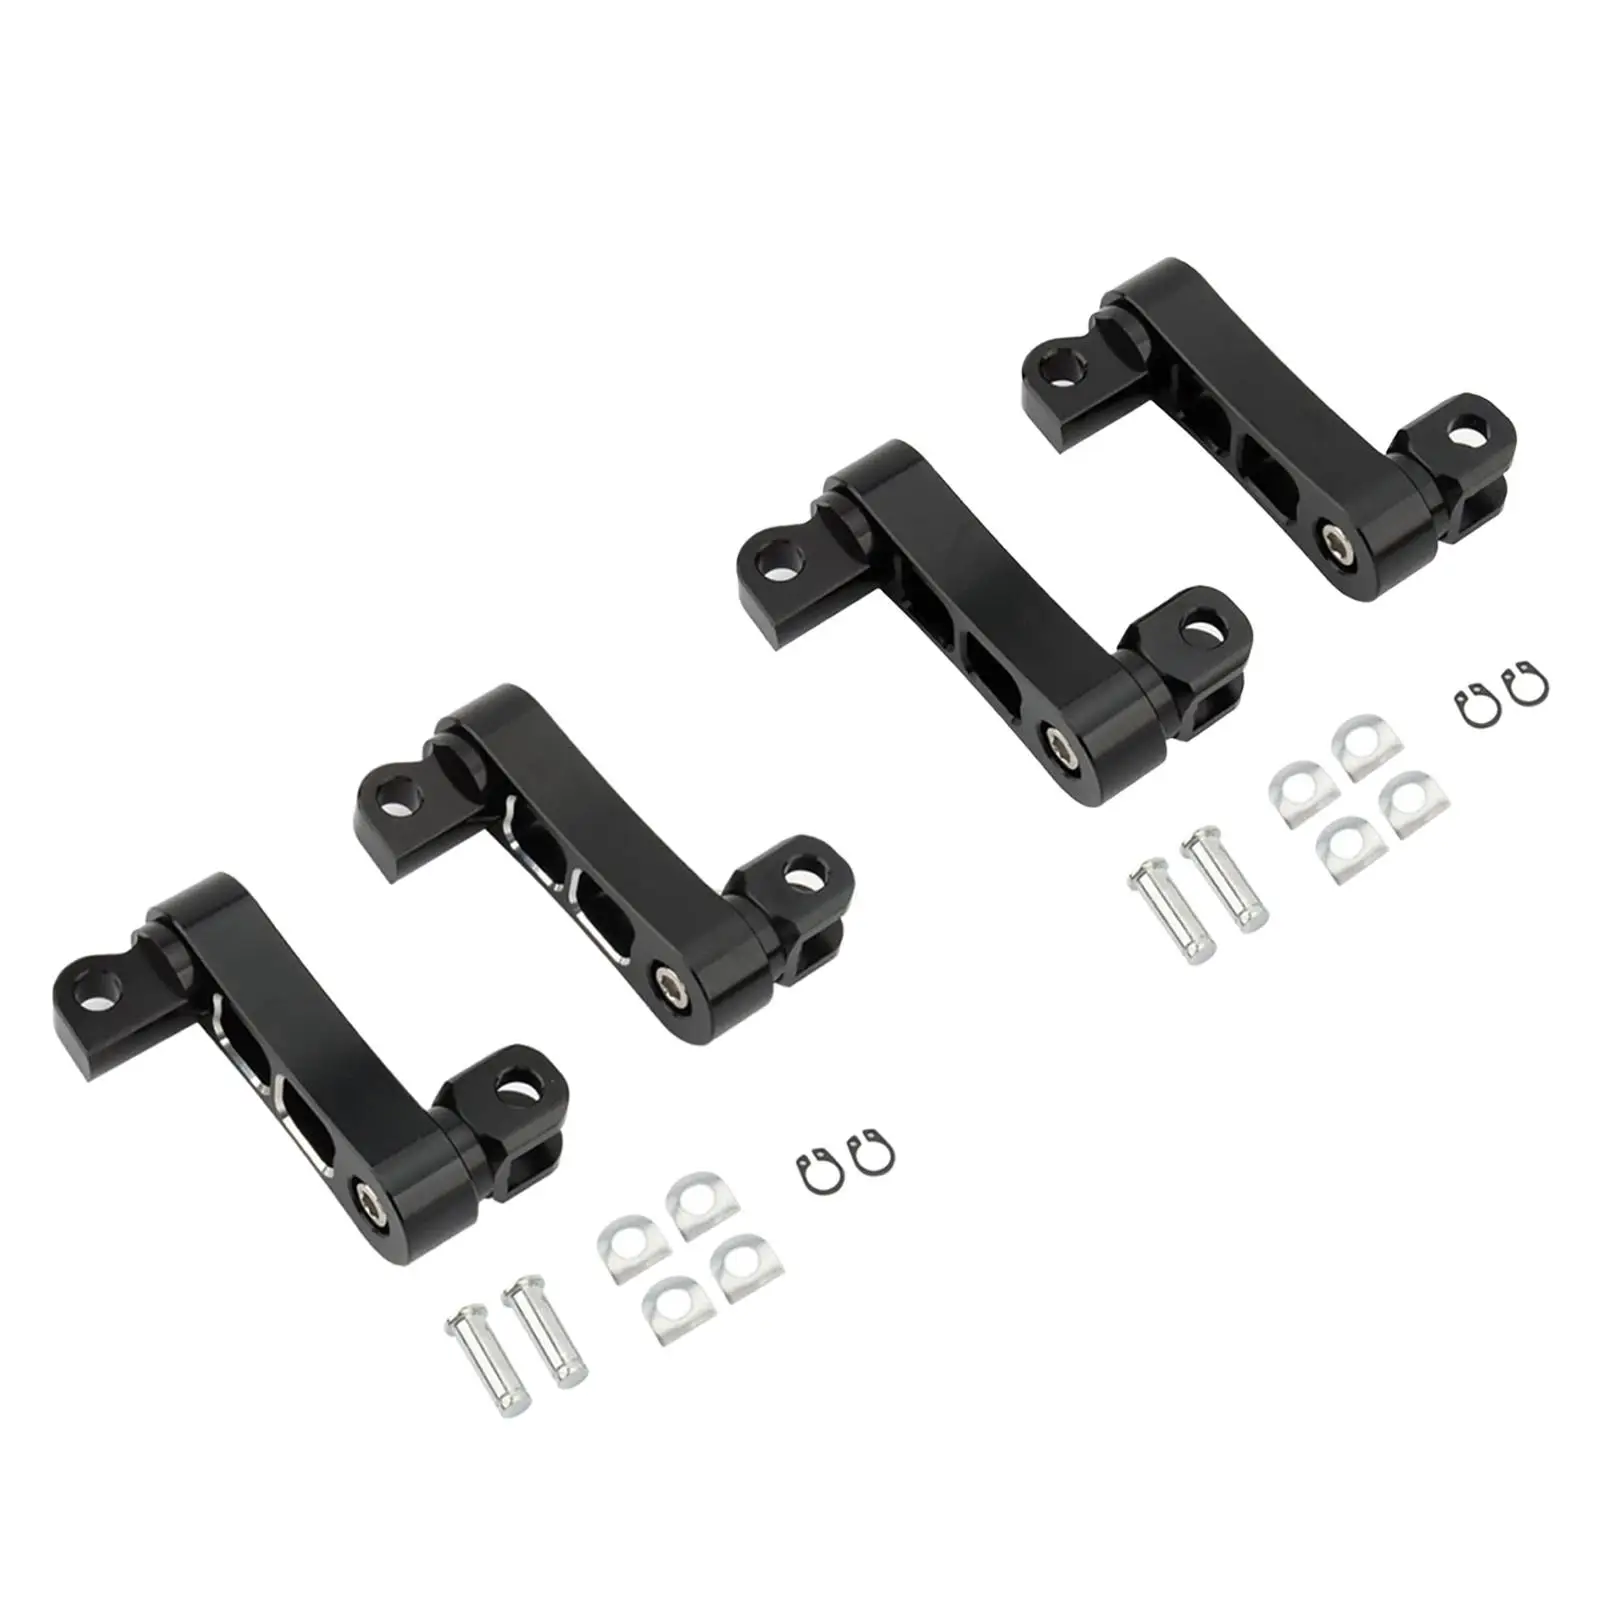 Motorcycle Passenger Footpegs Extensions 500264235A2 Aluminum Stable Performance and Screws Foot Peg Clamp Support Adjustable